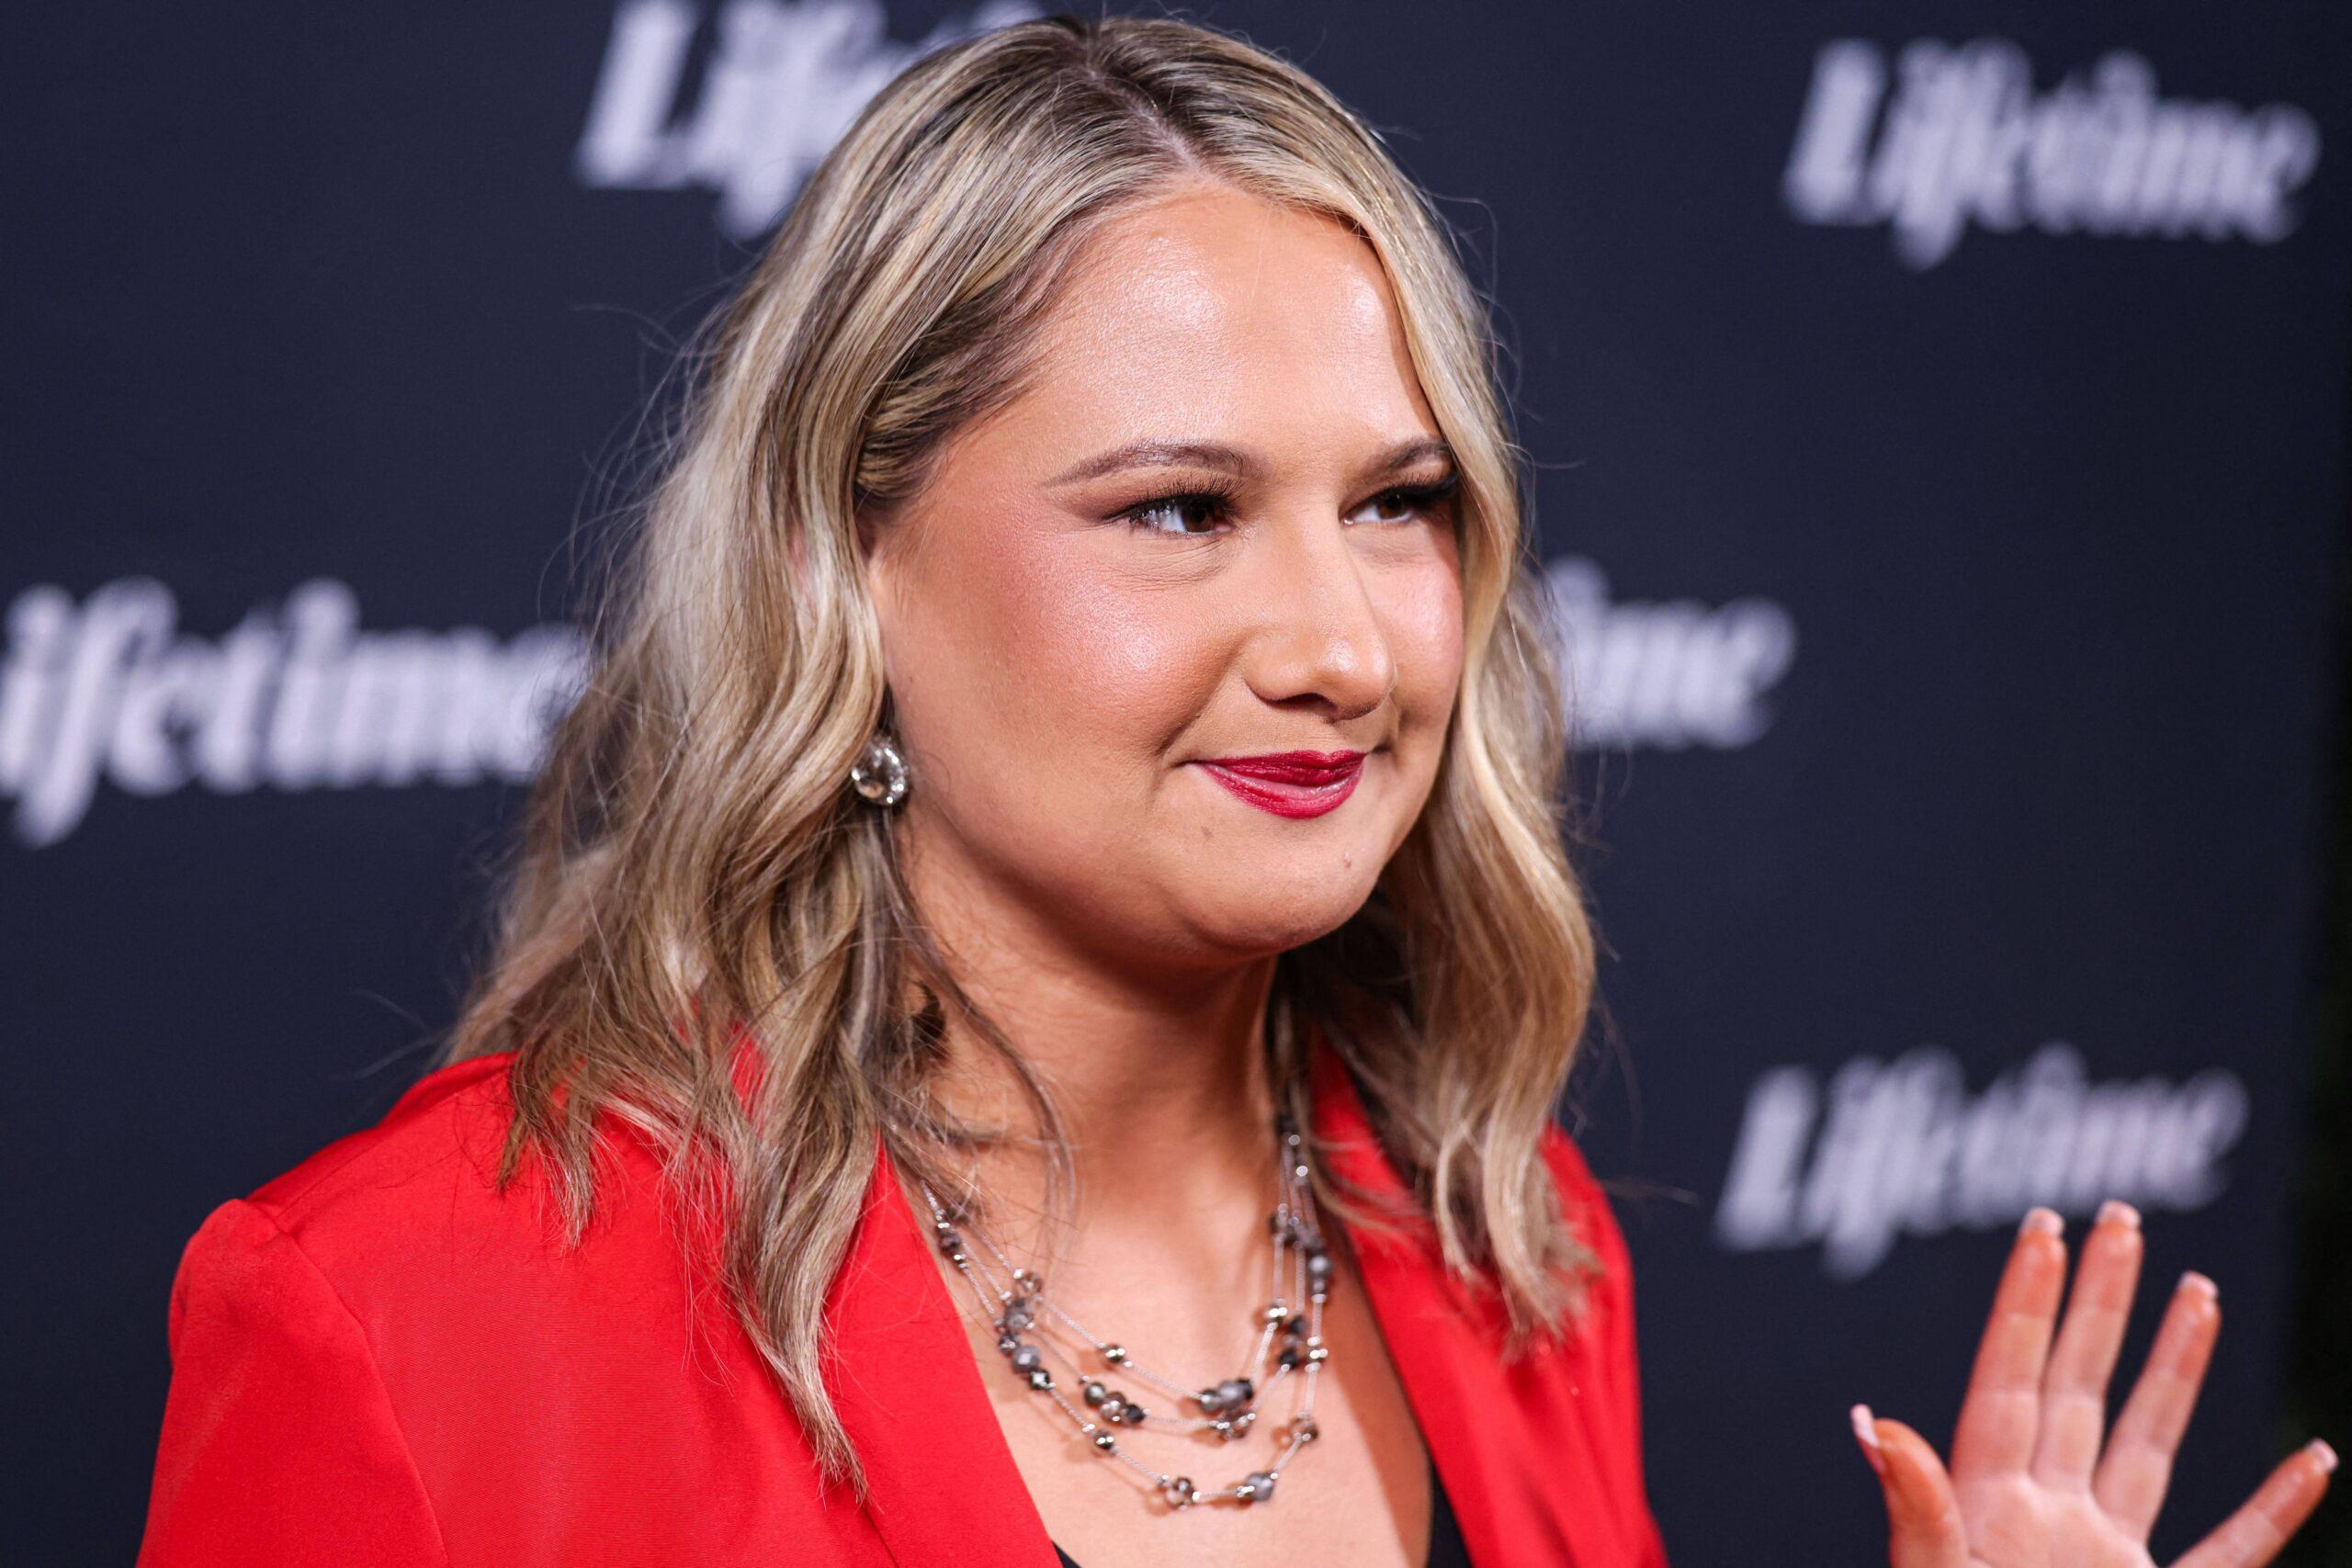 Gypsy Rose Blanchard at An Evening With Lifetime: Conversations On Controversies FYC Event